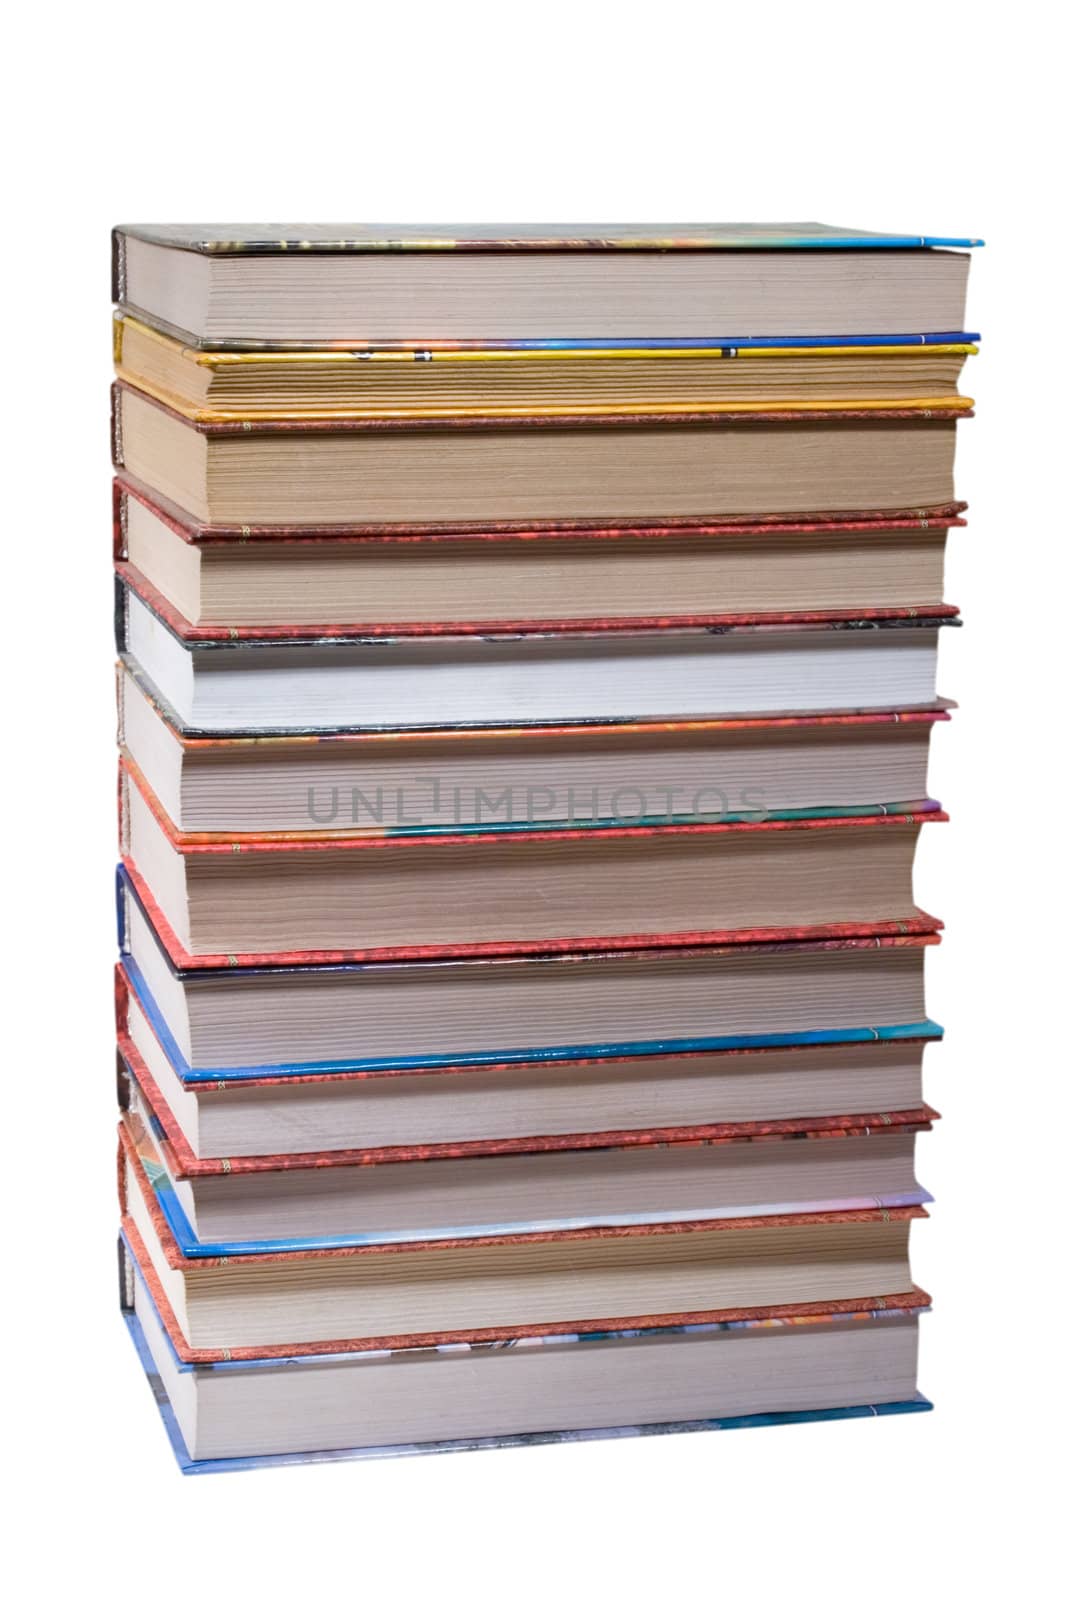 dozen different books, stacked on a white background
